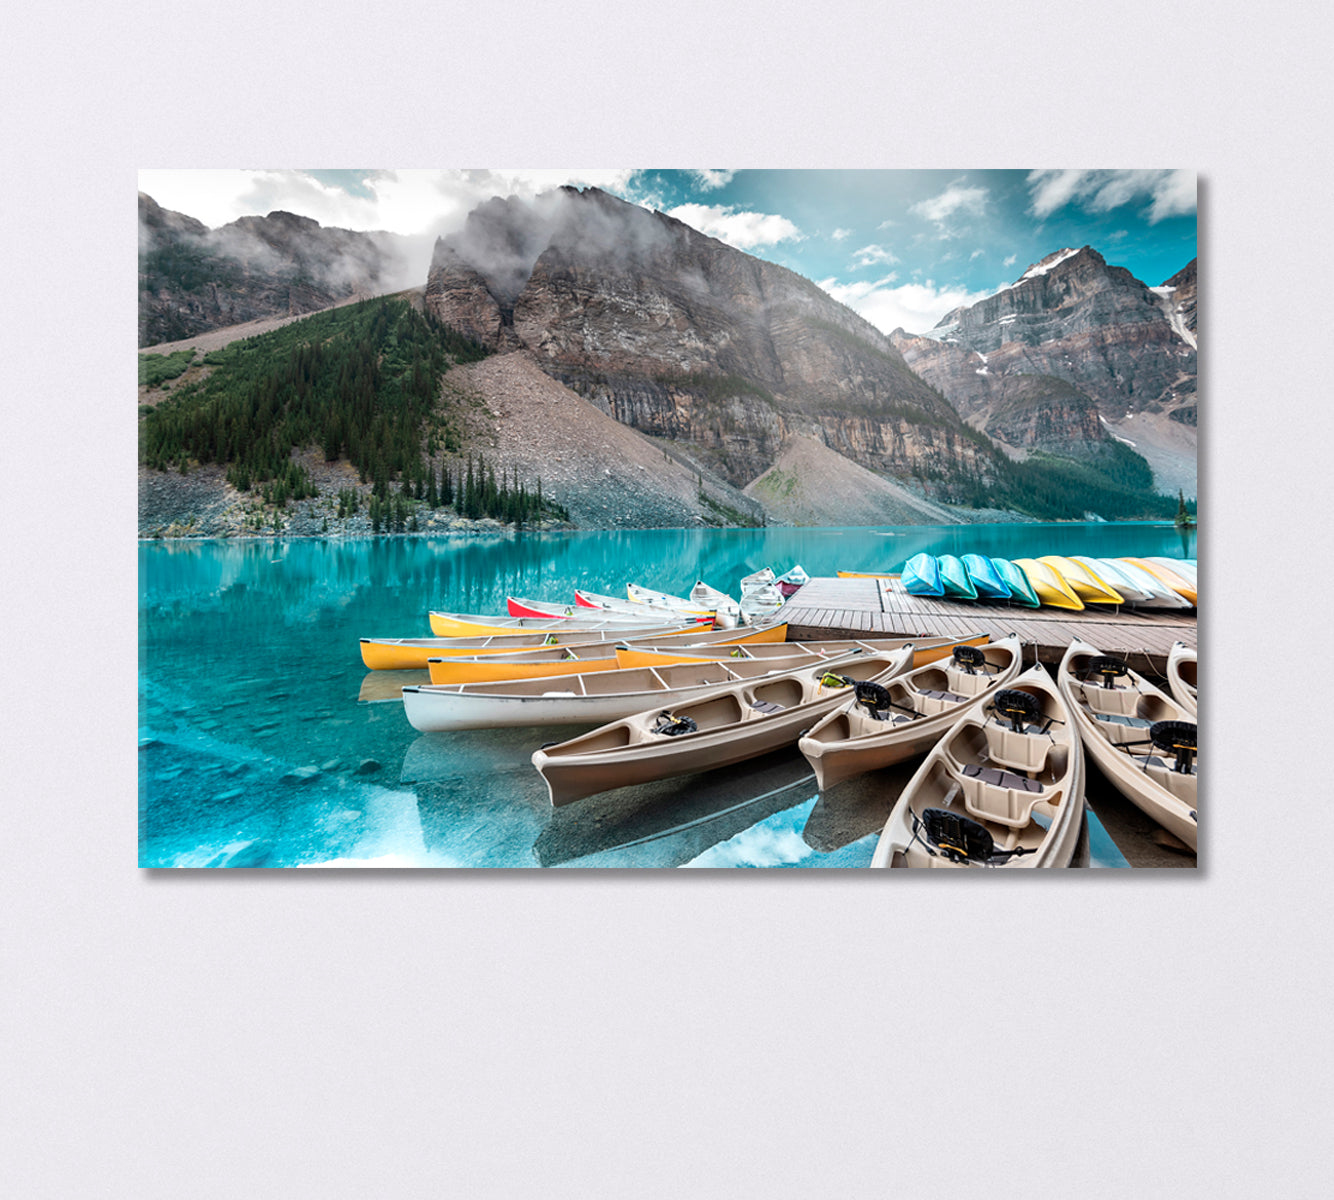 Canoe on the Lake in Banff National Park Canada Canvas Print-Canvas Print-CetArt-1 Panel-24x16 inches-CetArt